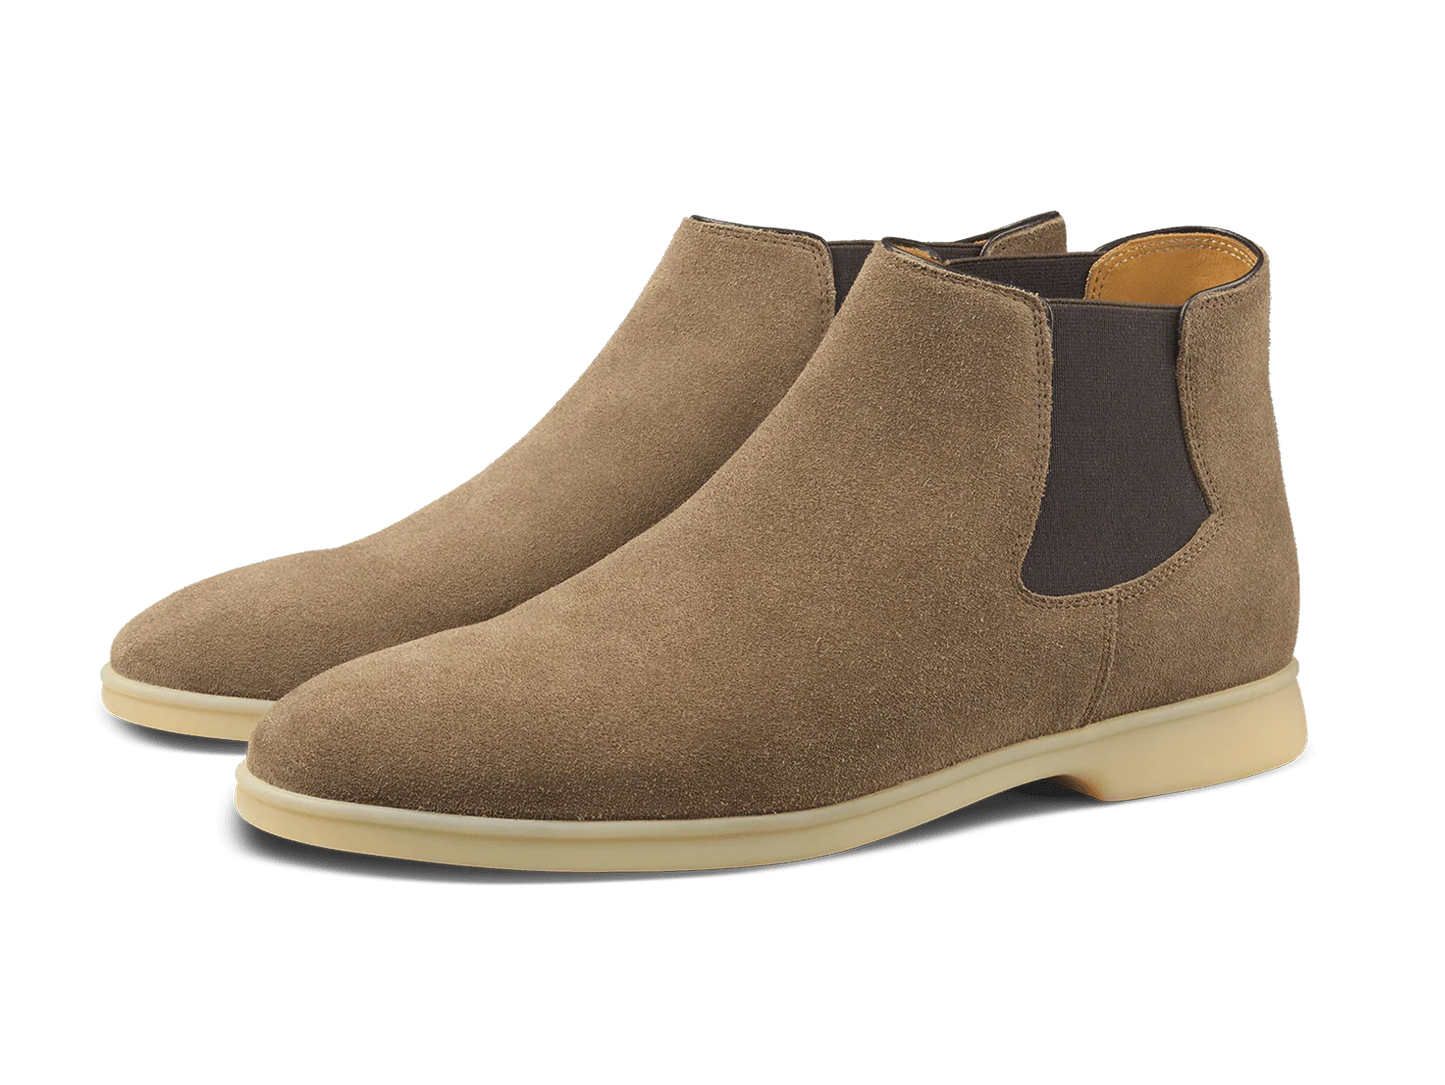 BLG Rover Boots Greige Suede Natural Sole